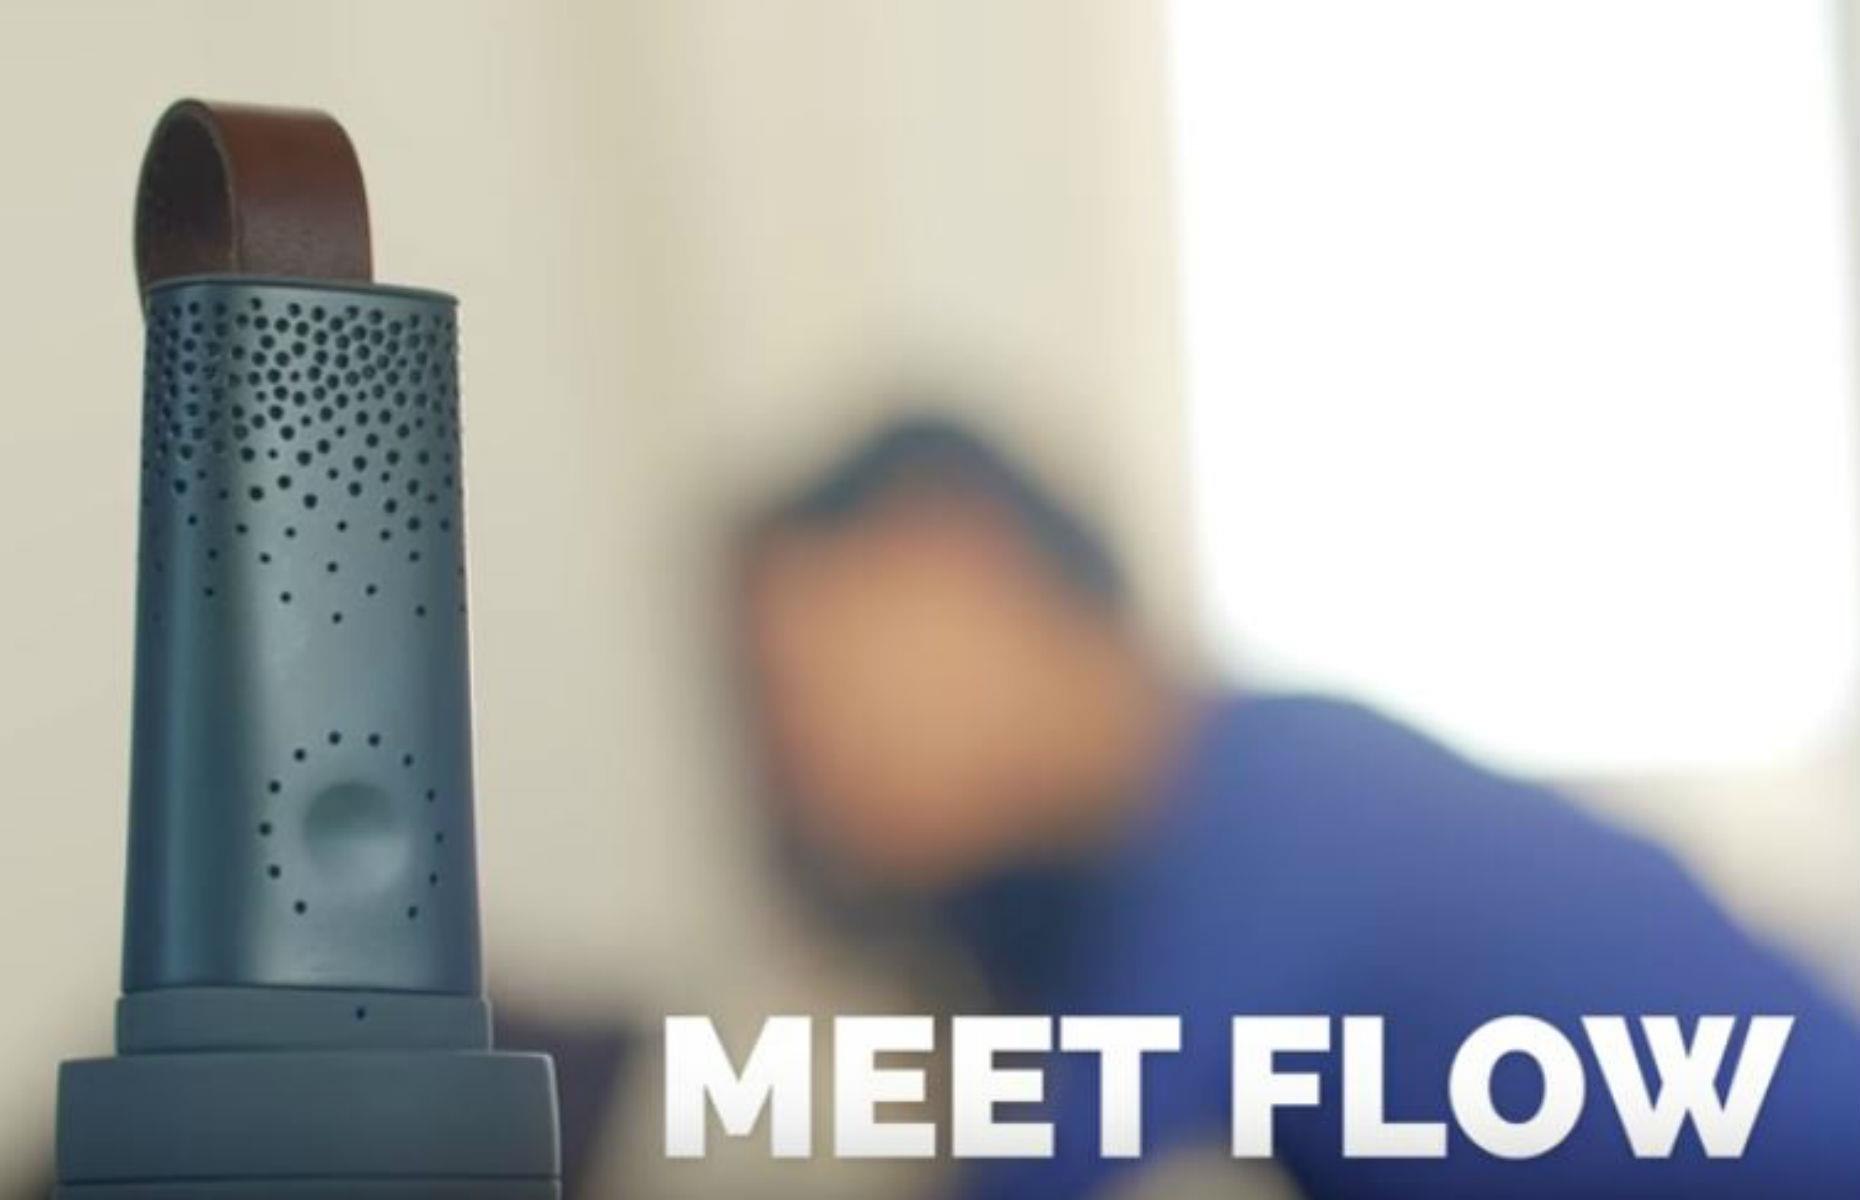 Flow smart mobile air quality tracker: price TBC